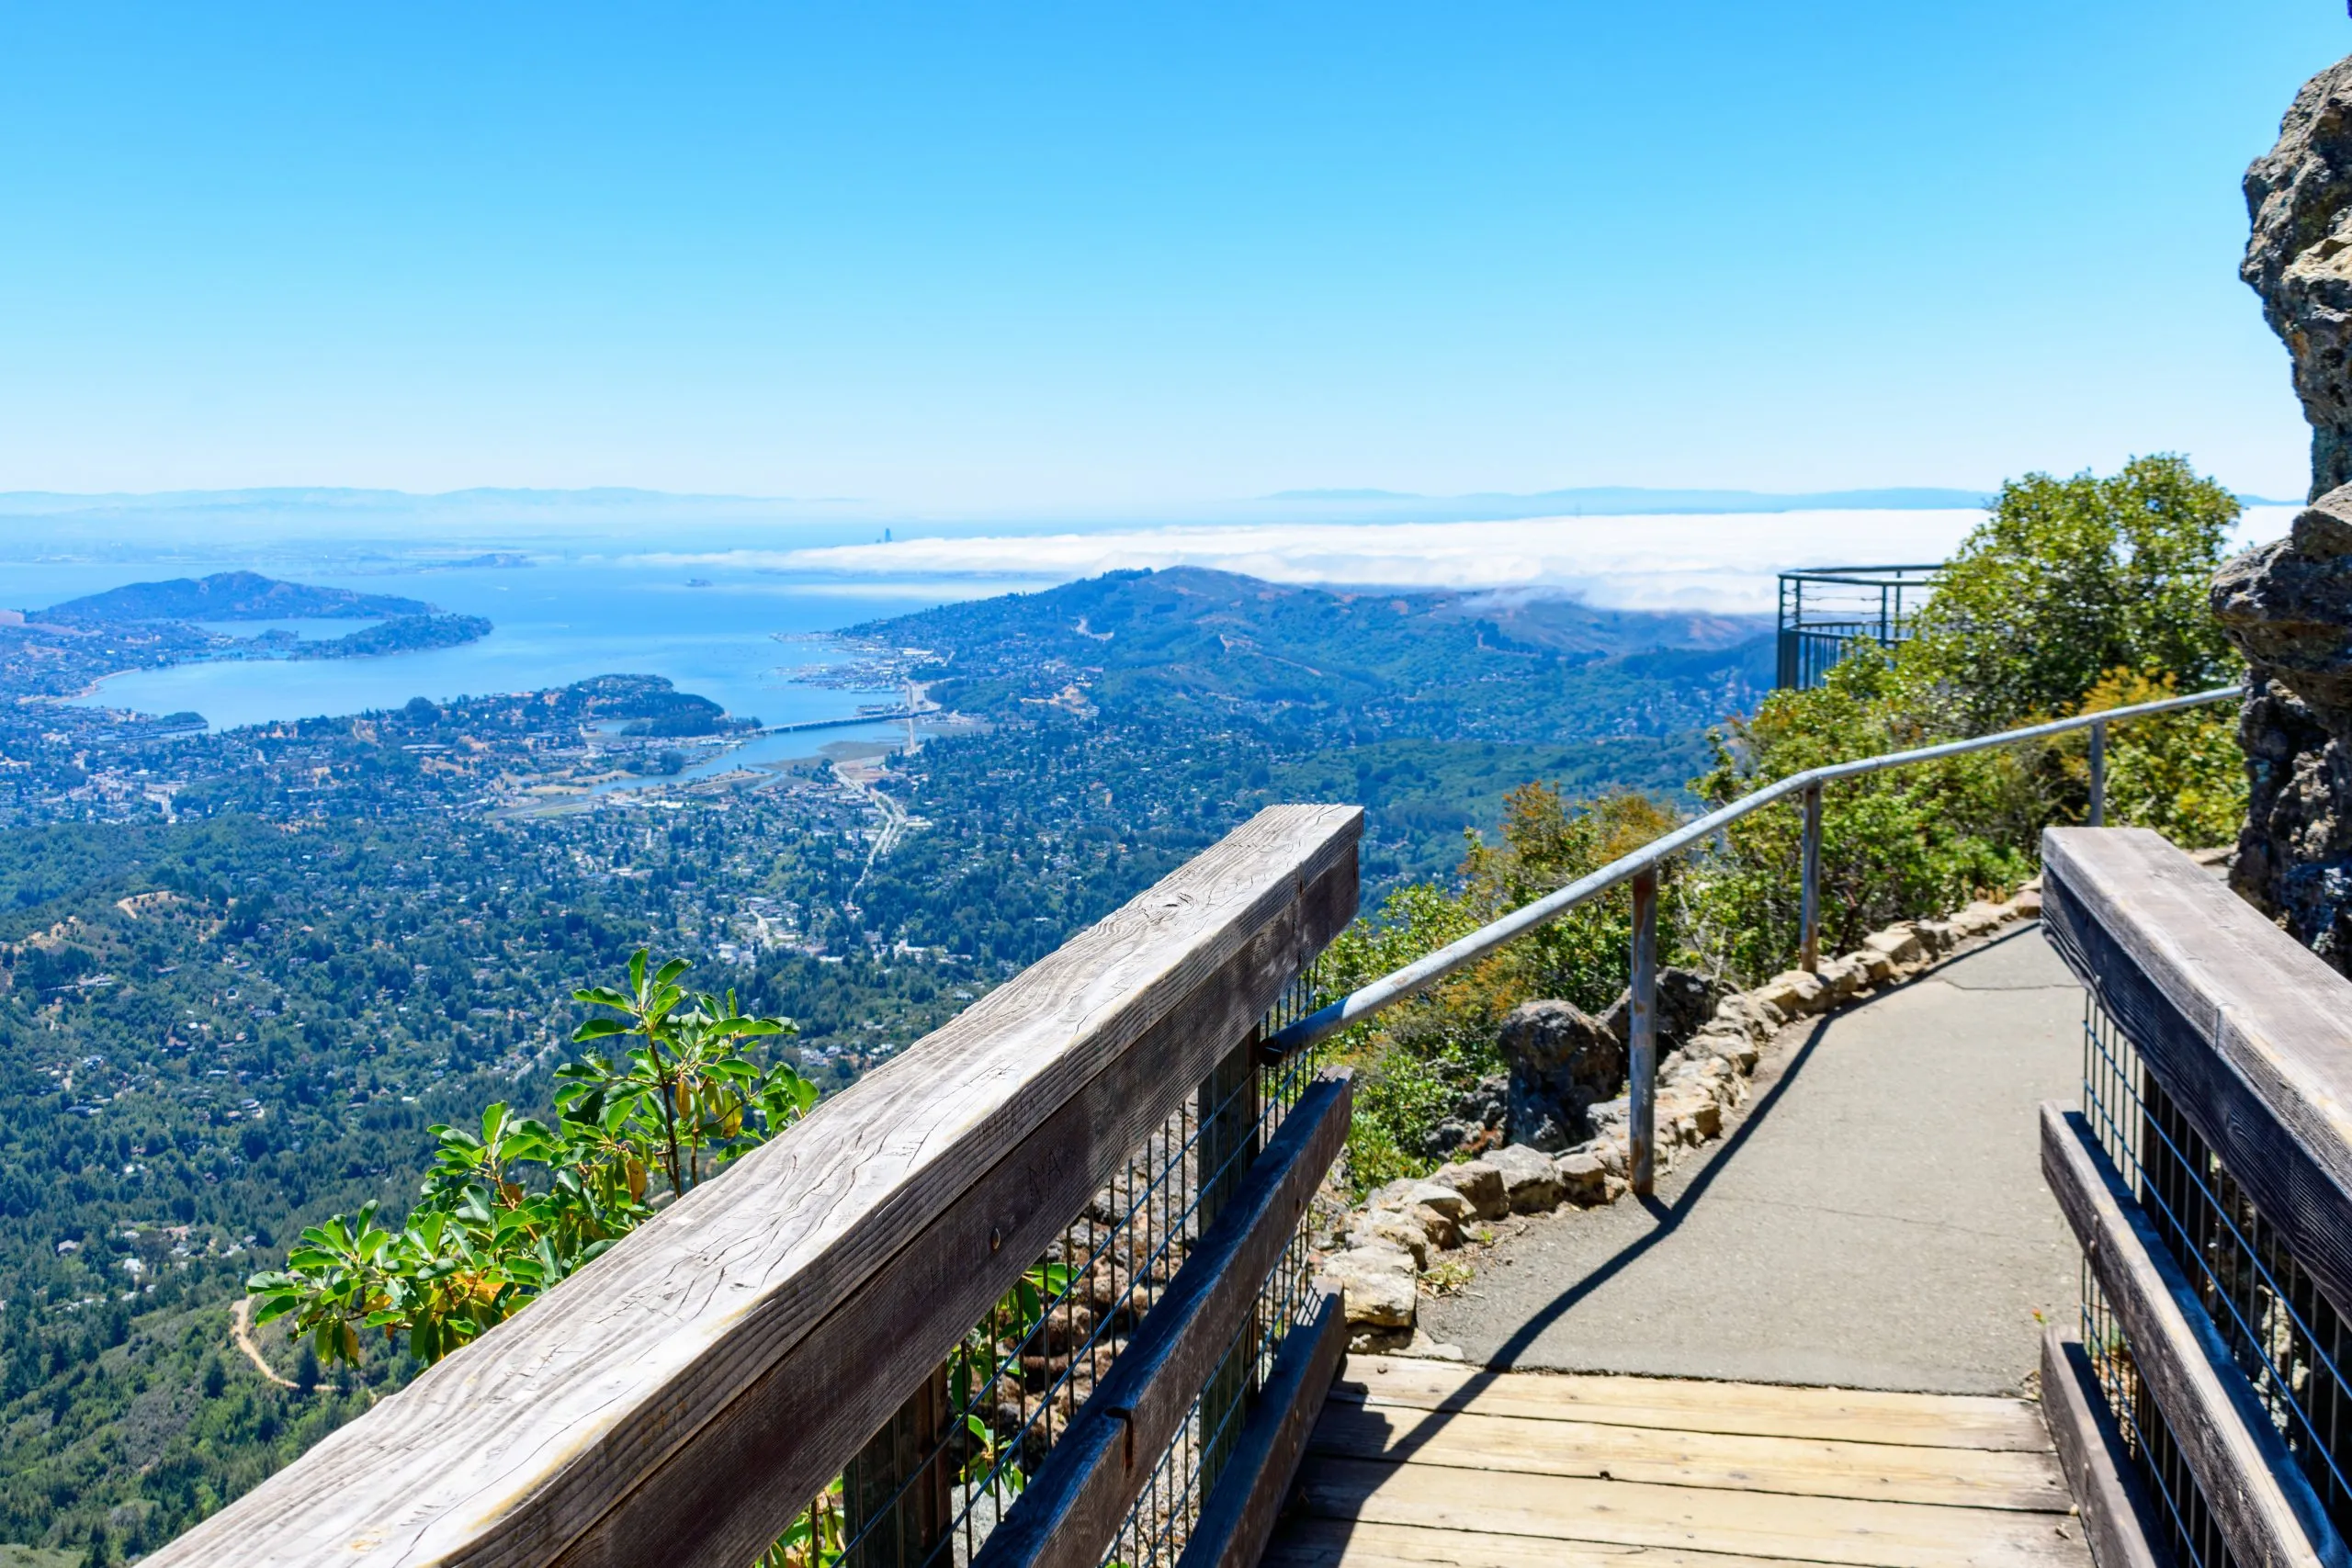 Spectacular aerial view of San Francisco Bay area from the Verna Dunshee Trail at Mount Tamalpais